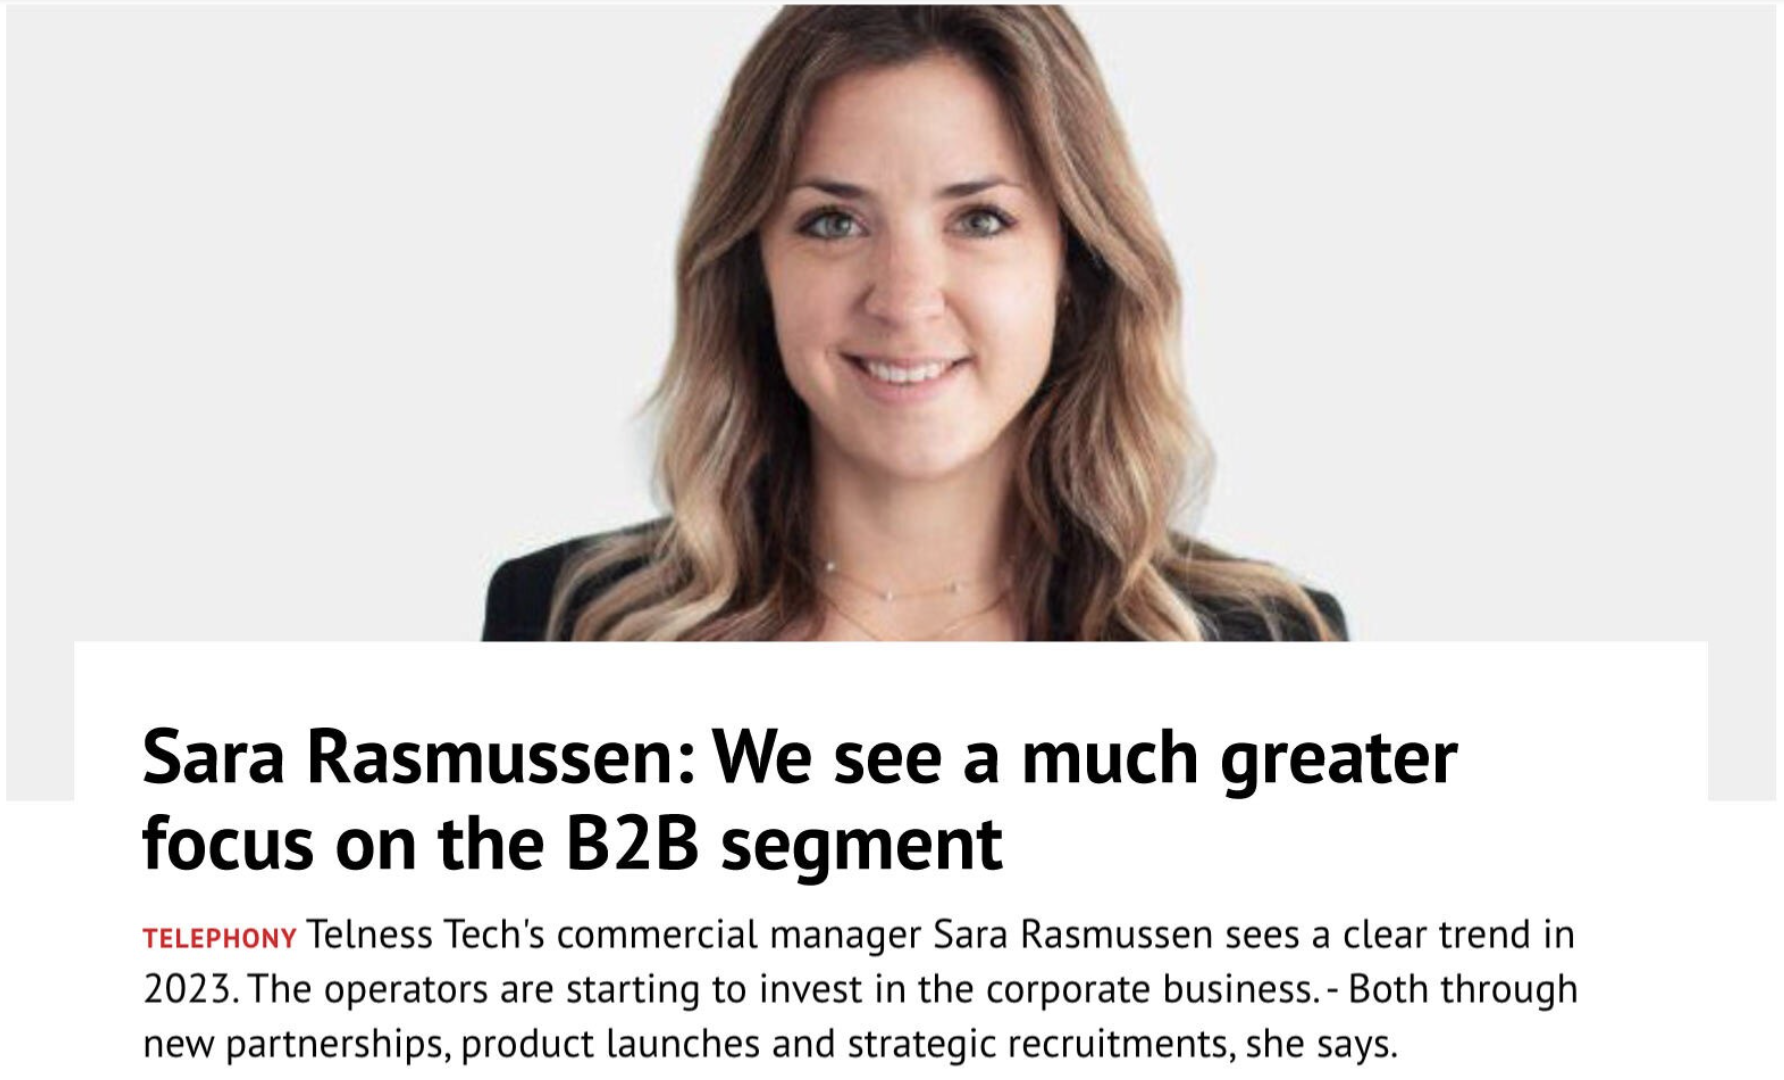 Sara Rasmussen: We see a much greater focus on the B2B segment